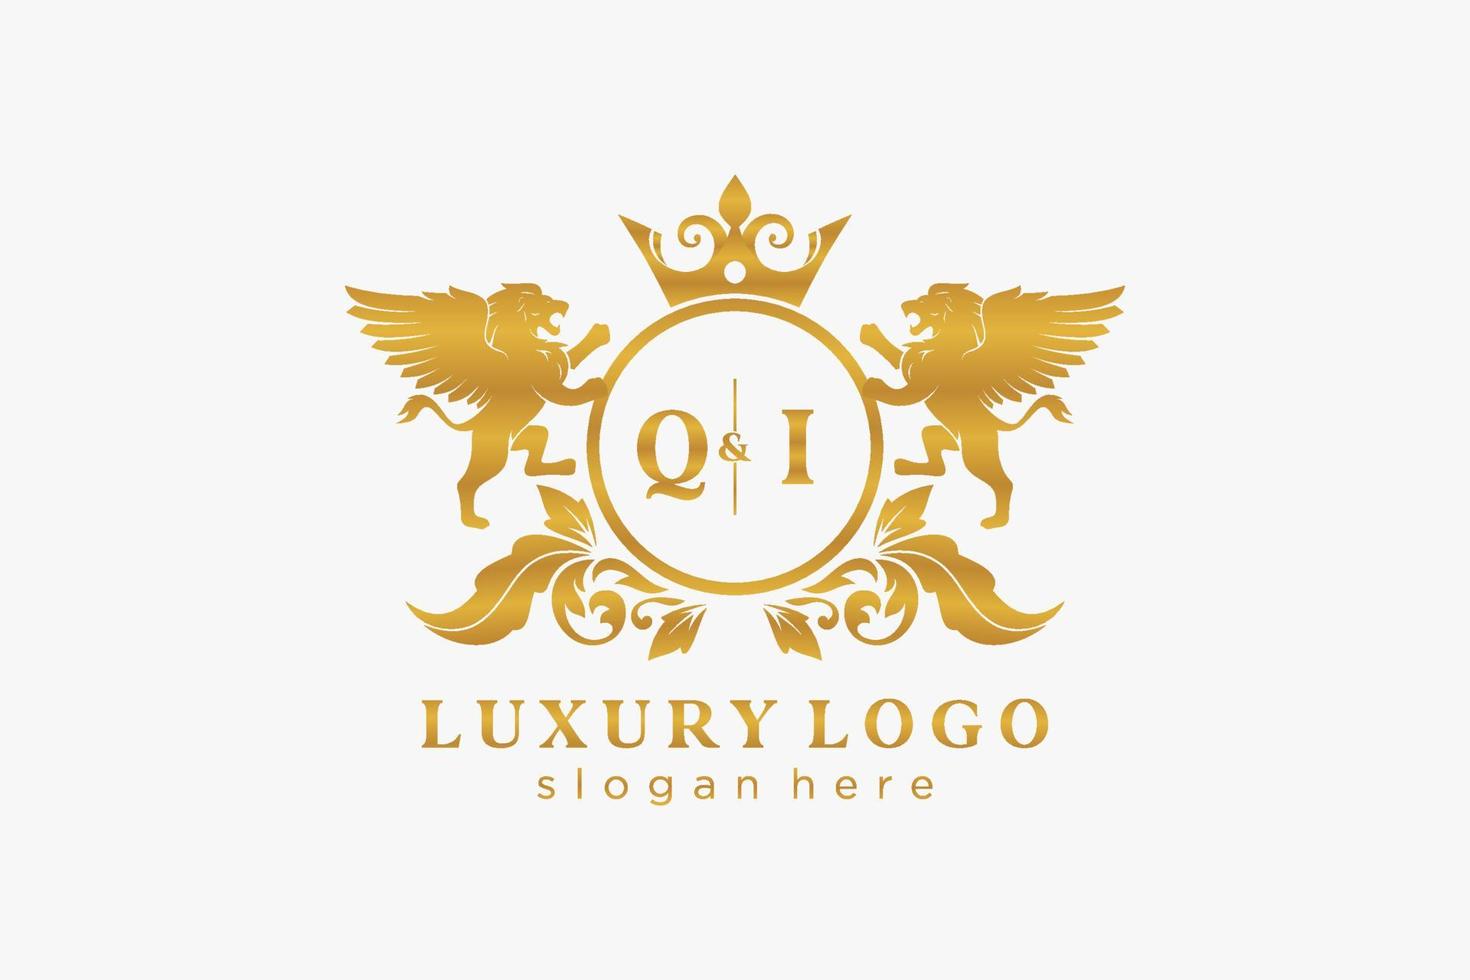 Initial QI Letter Lion Royal Luxury Logo template in vector art for Restaurant, Royalty, Boutique, Cafe, Hotel, Heraldic, Jewelry, Fashion and other vector illustration.